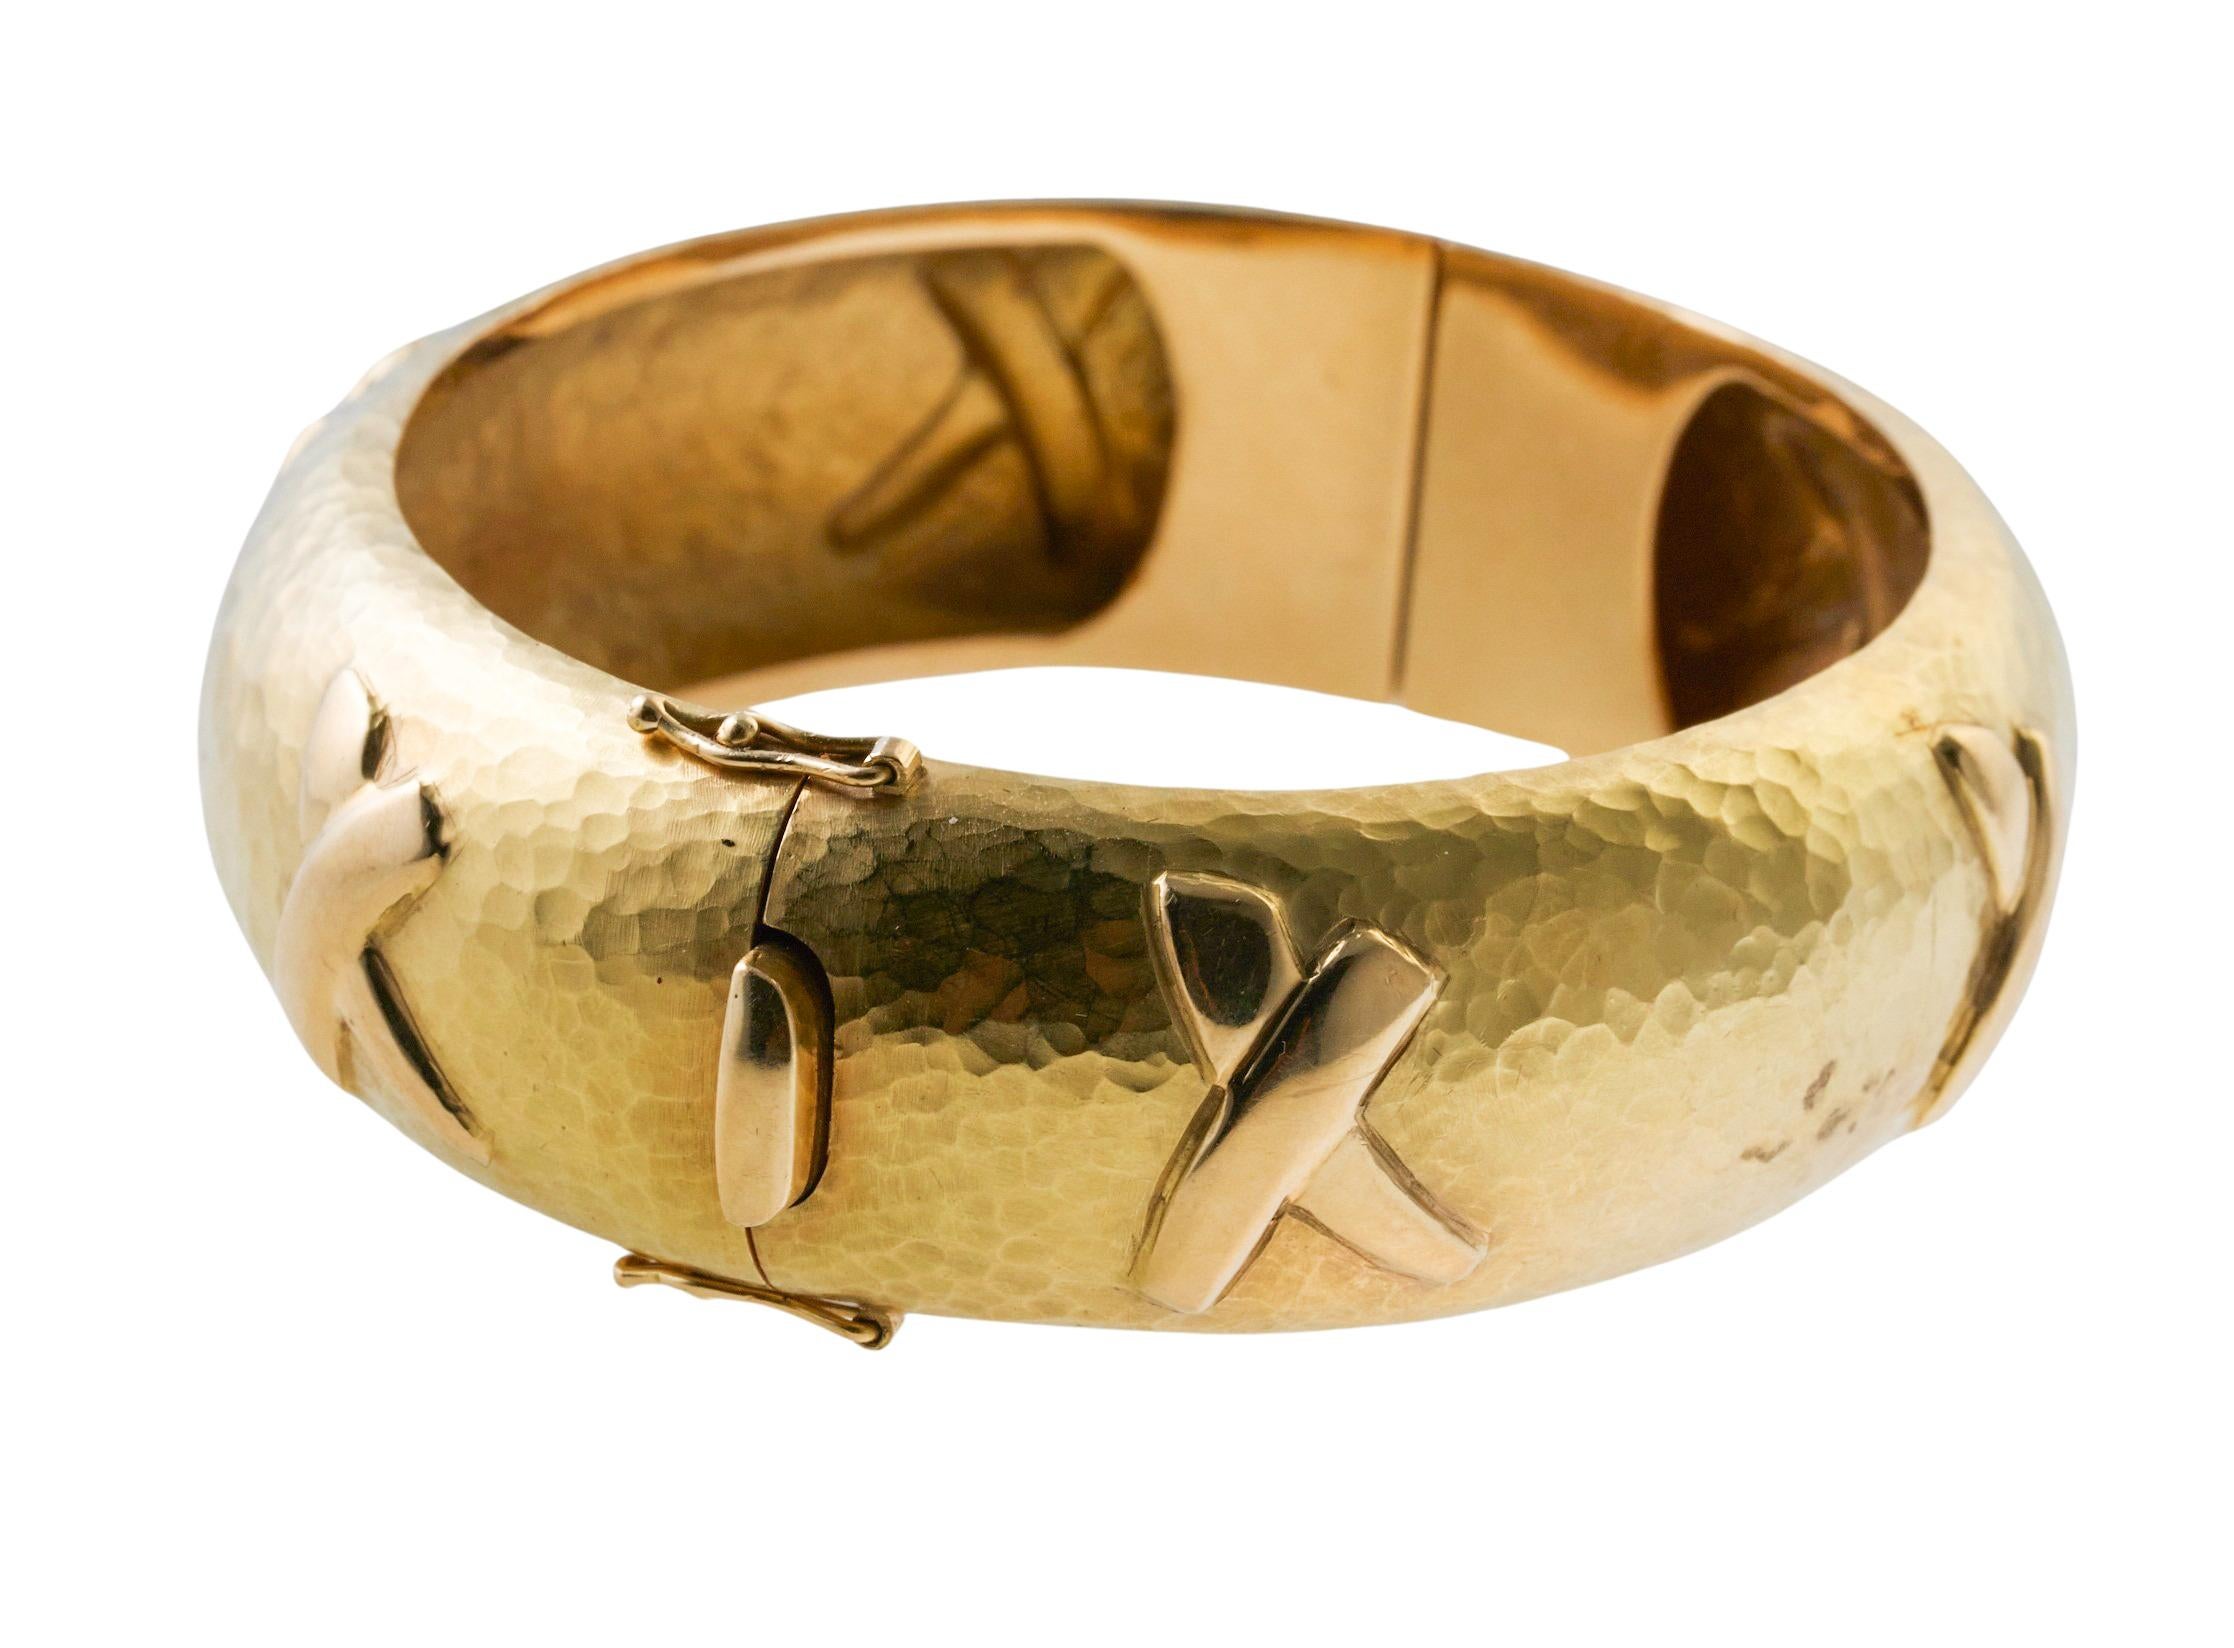 18k hammered finish gold bangle bracelet, designed by Paloma Picasso for Tiffany & Co, from signature Graffiti collection, featuring X design. Bracelet will fit an approx. 7.5